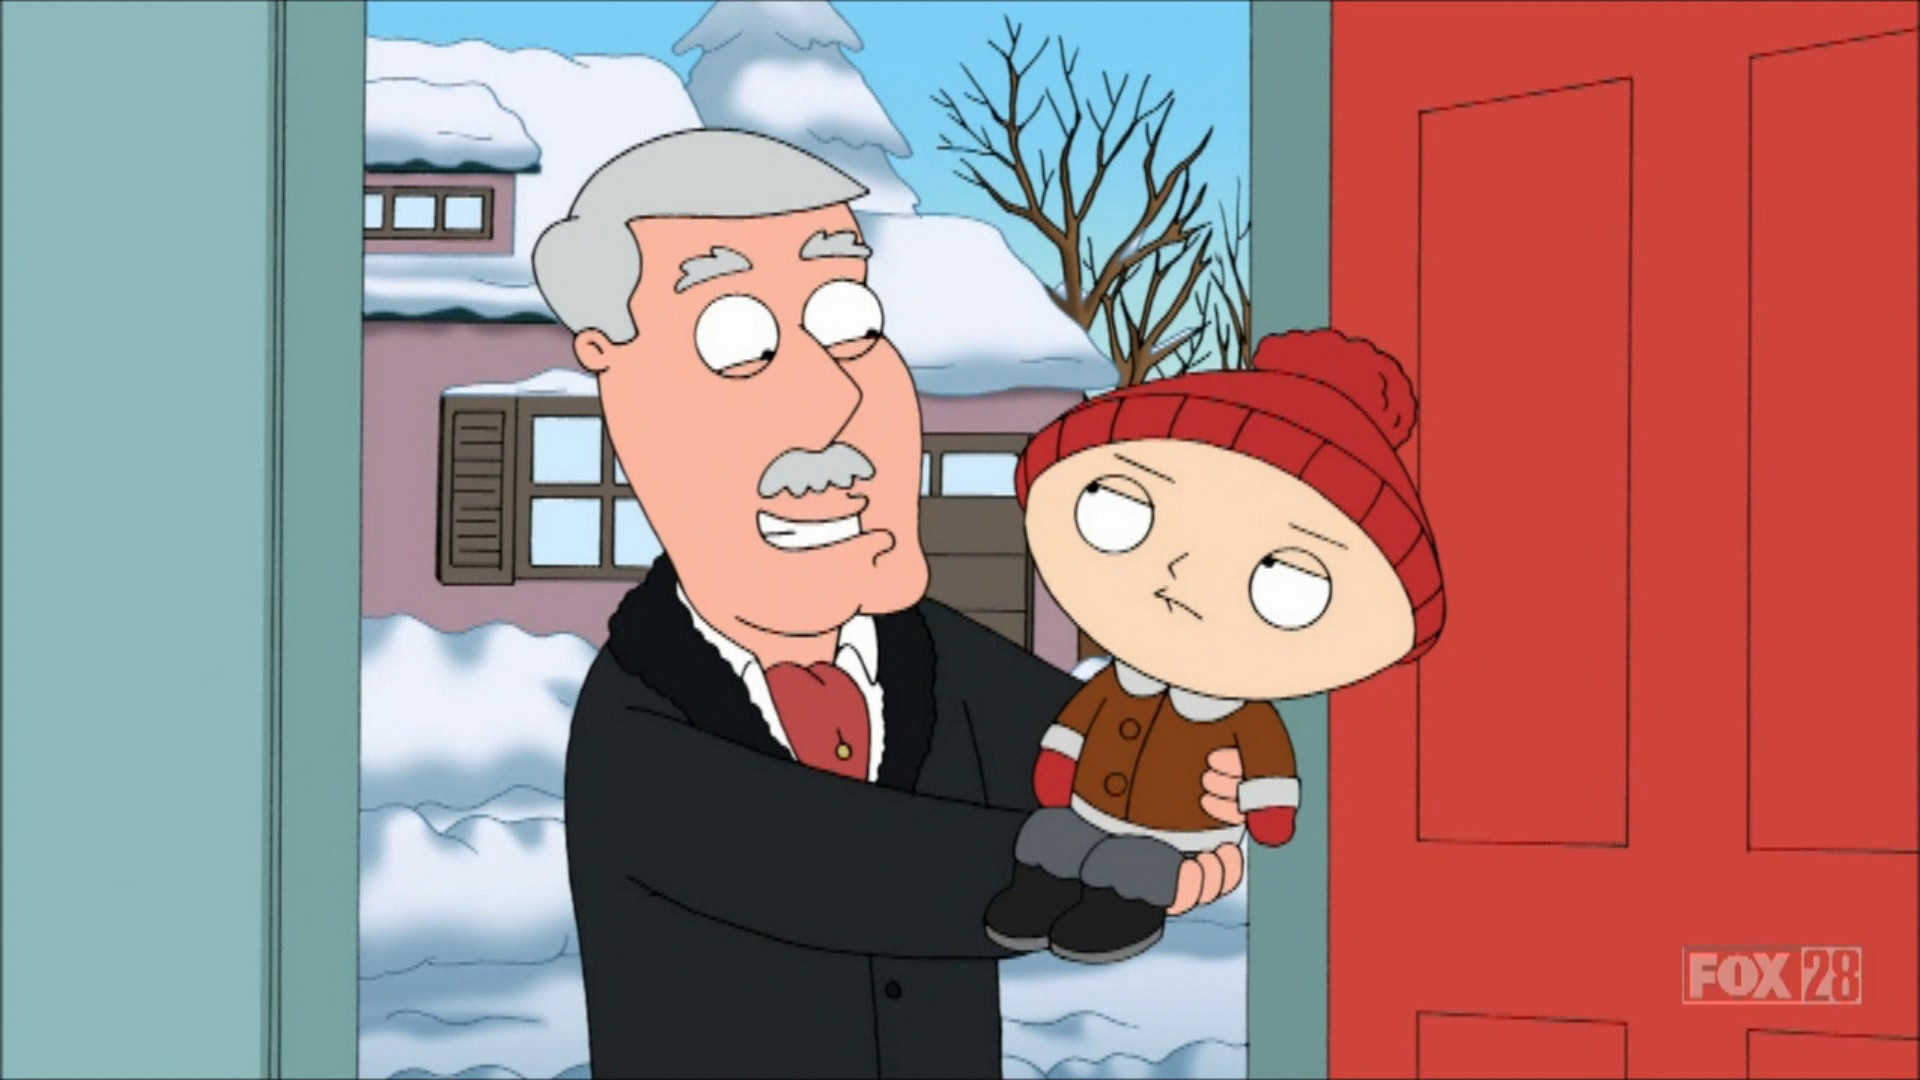 1920x1080 Wallpaper Of Carter Pewterschmidt And Stewie Griffin From Family Guy |  PaperPull